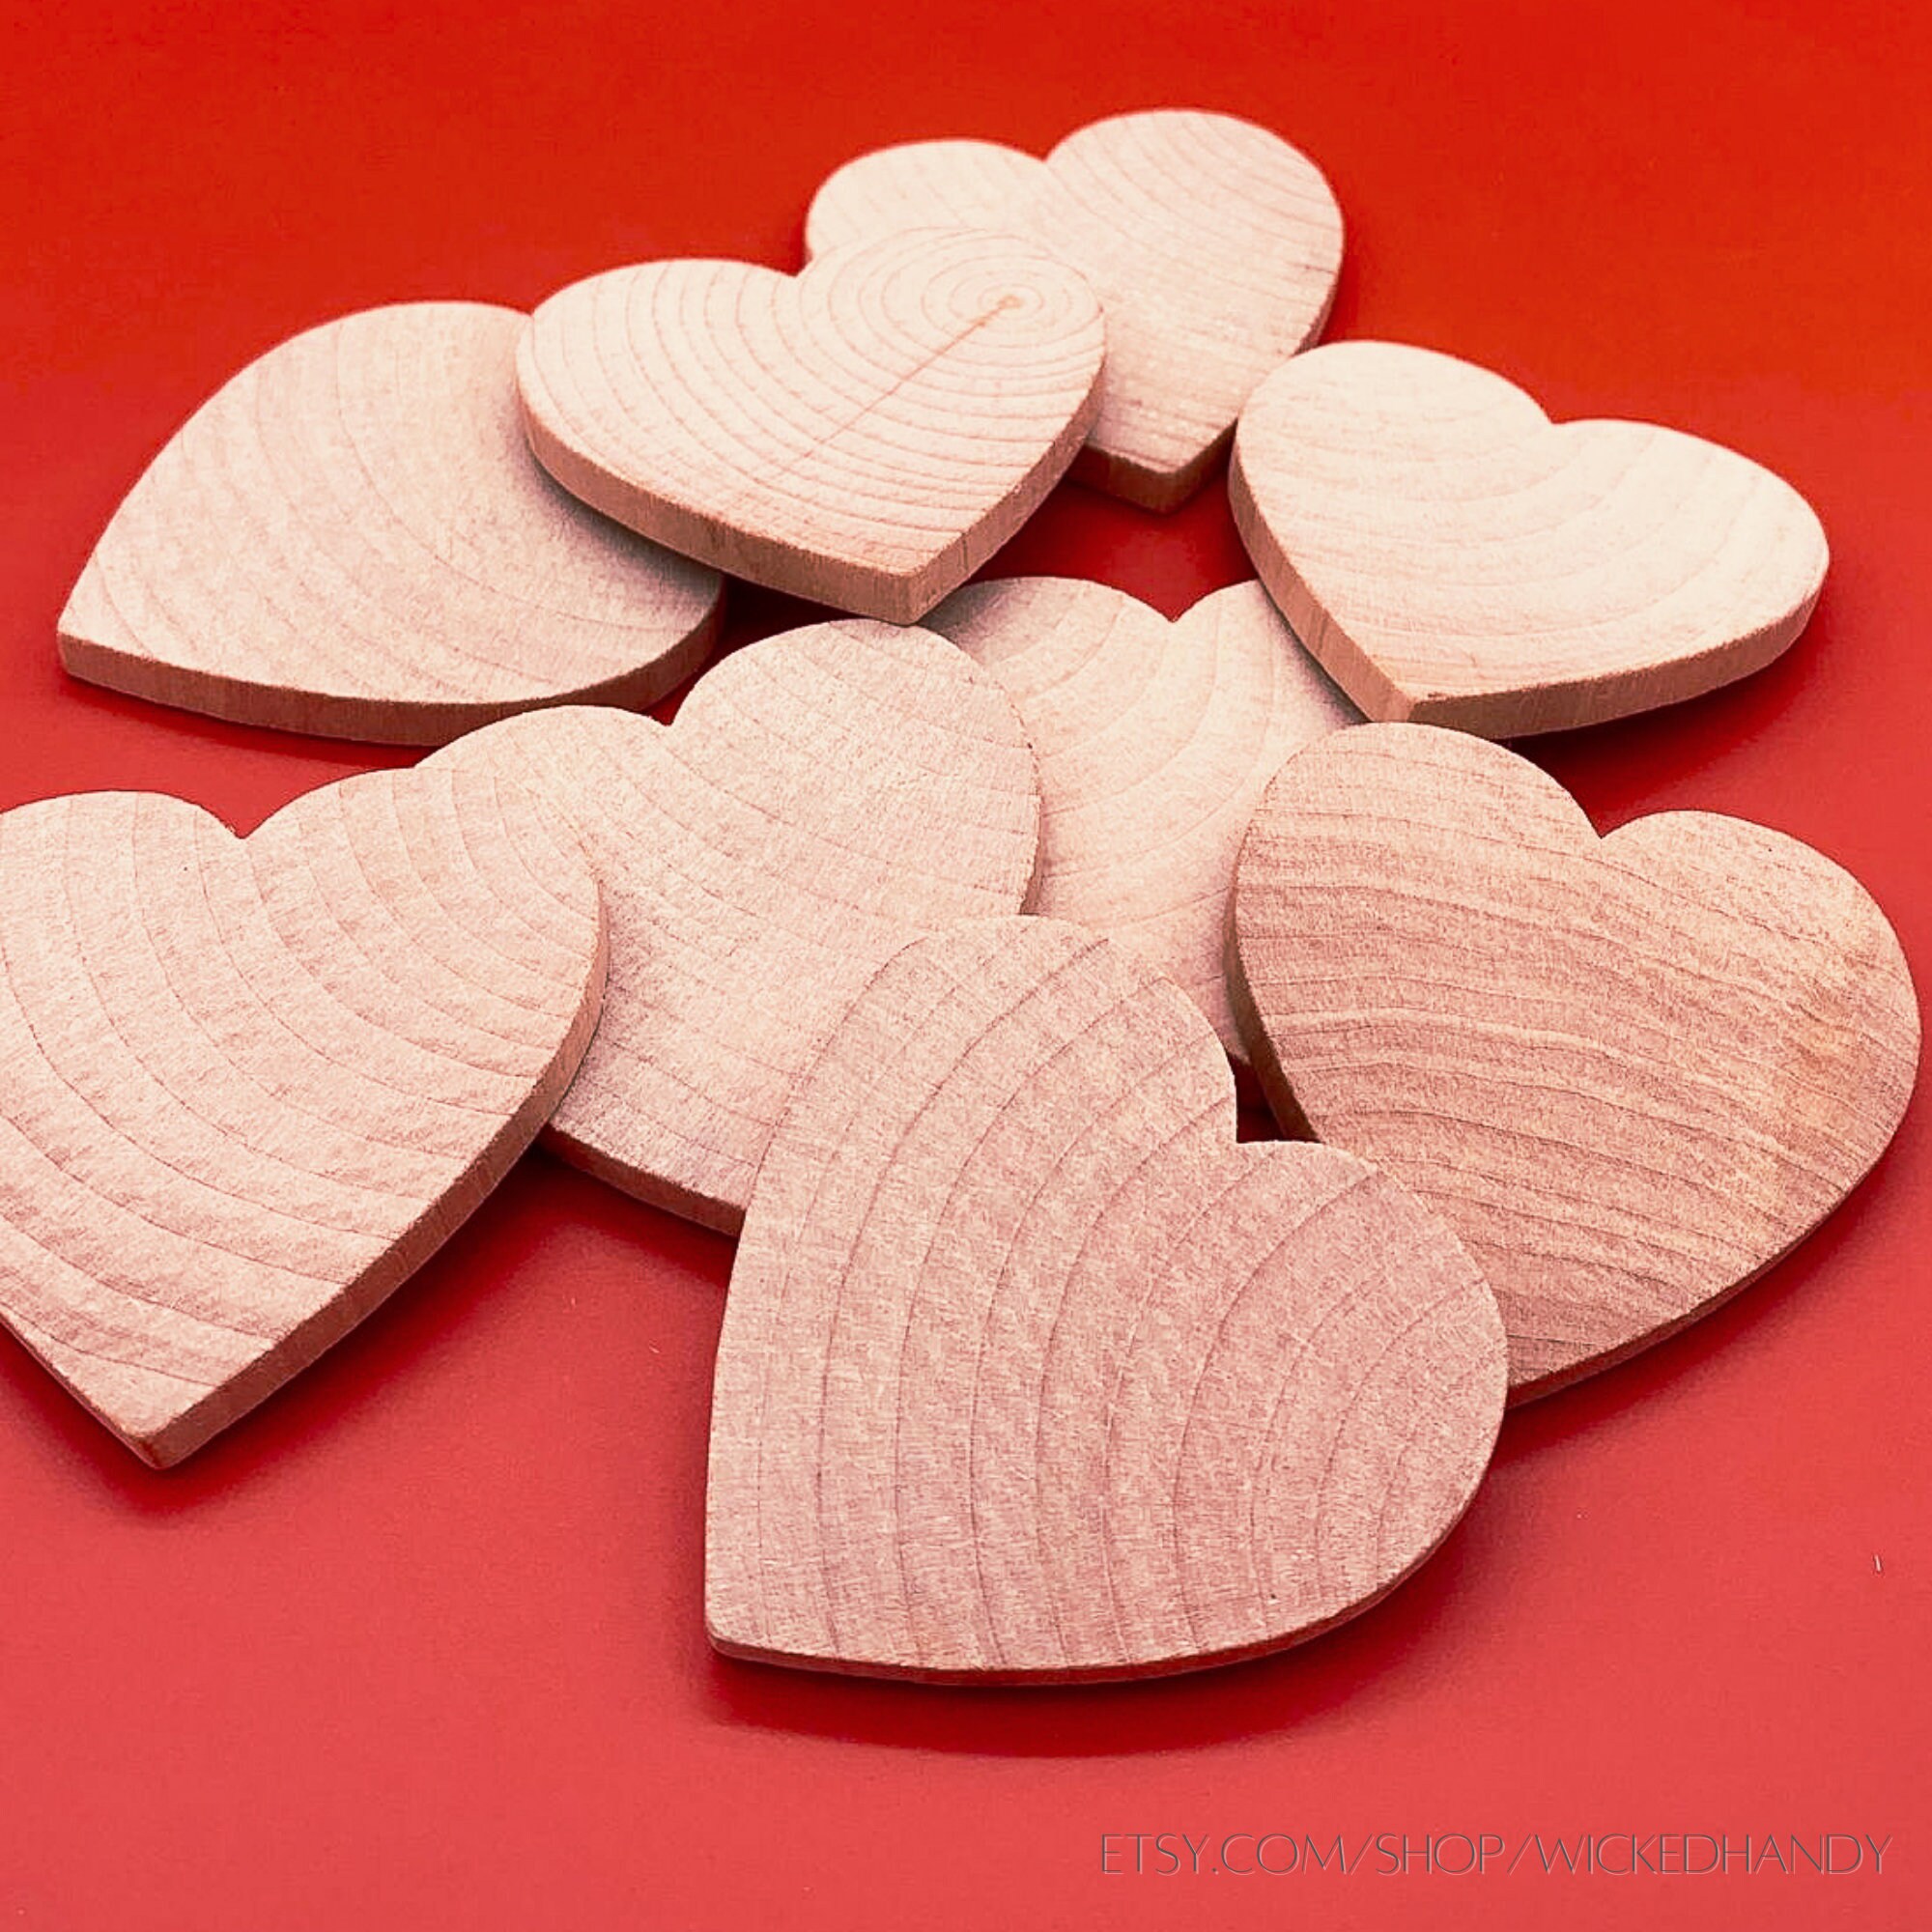 Unfinished Wood Heart, Wooden Heart Cutout, Wood Shapes for Crafts,  Valentine's Day Craft, Heart Crafts, DIY Tiered Tray, Gifts for Crafters 